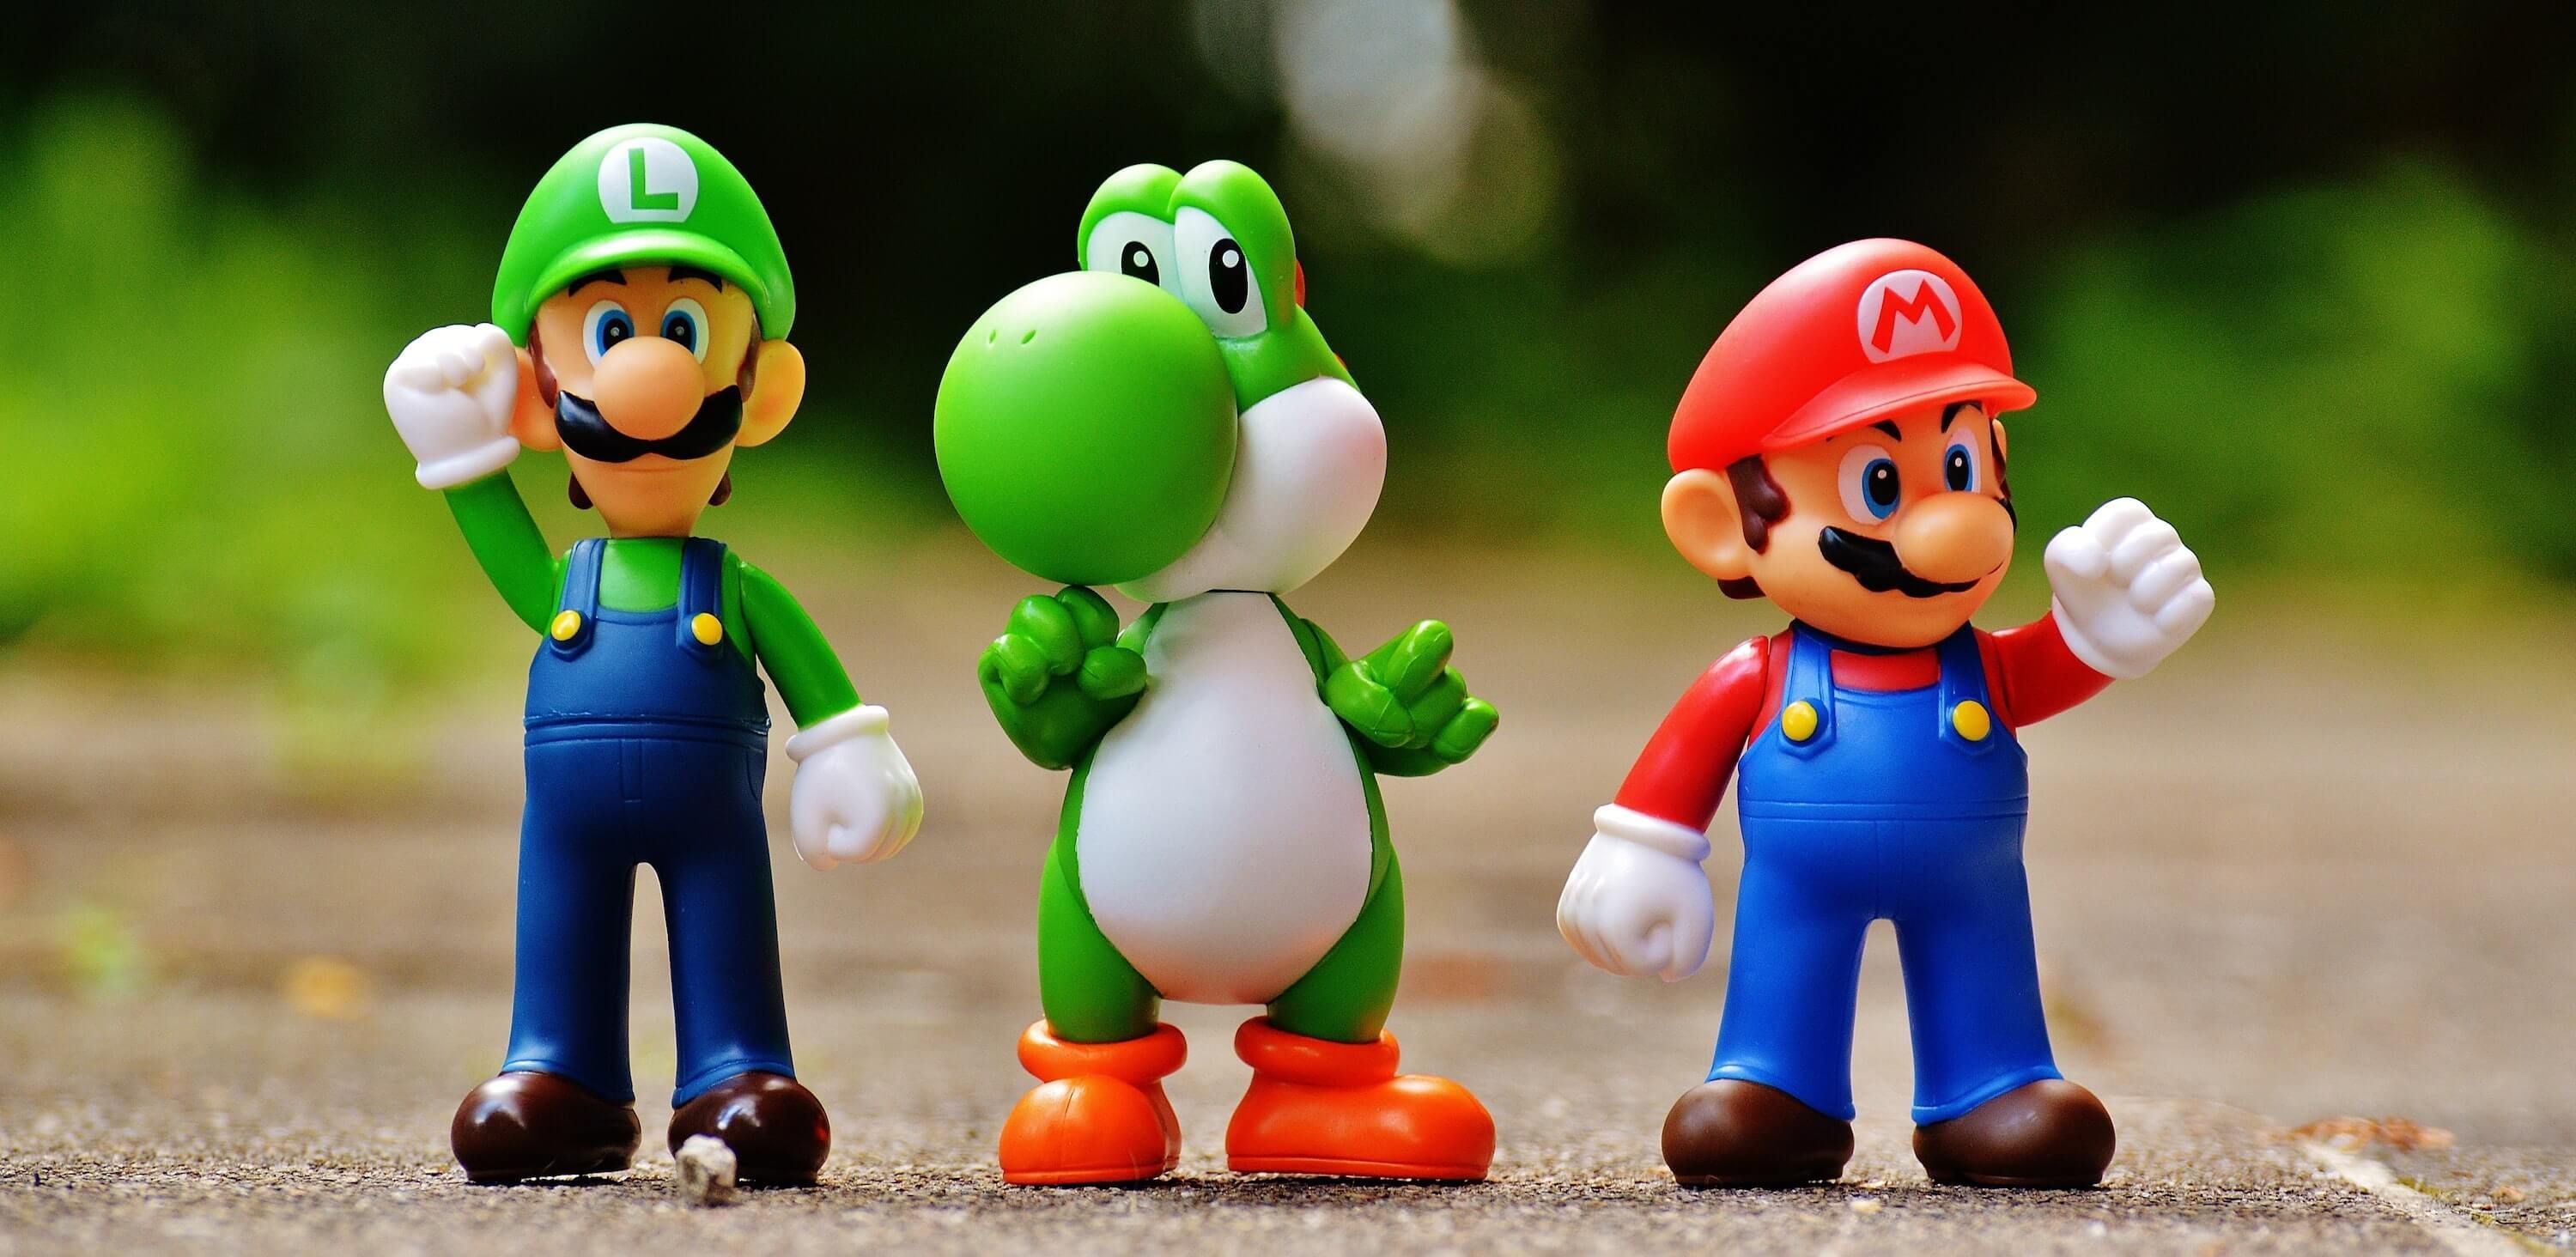 fundamental user onboarding lessons from classic Nintendo games